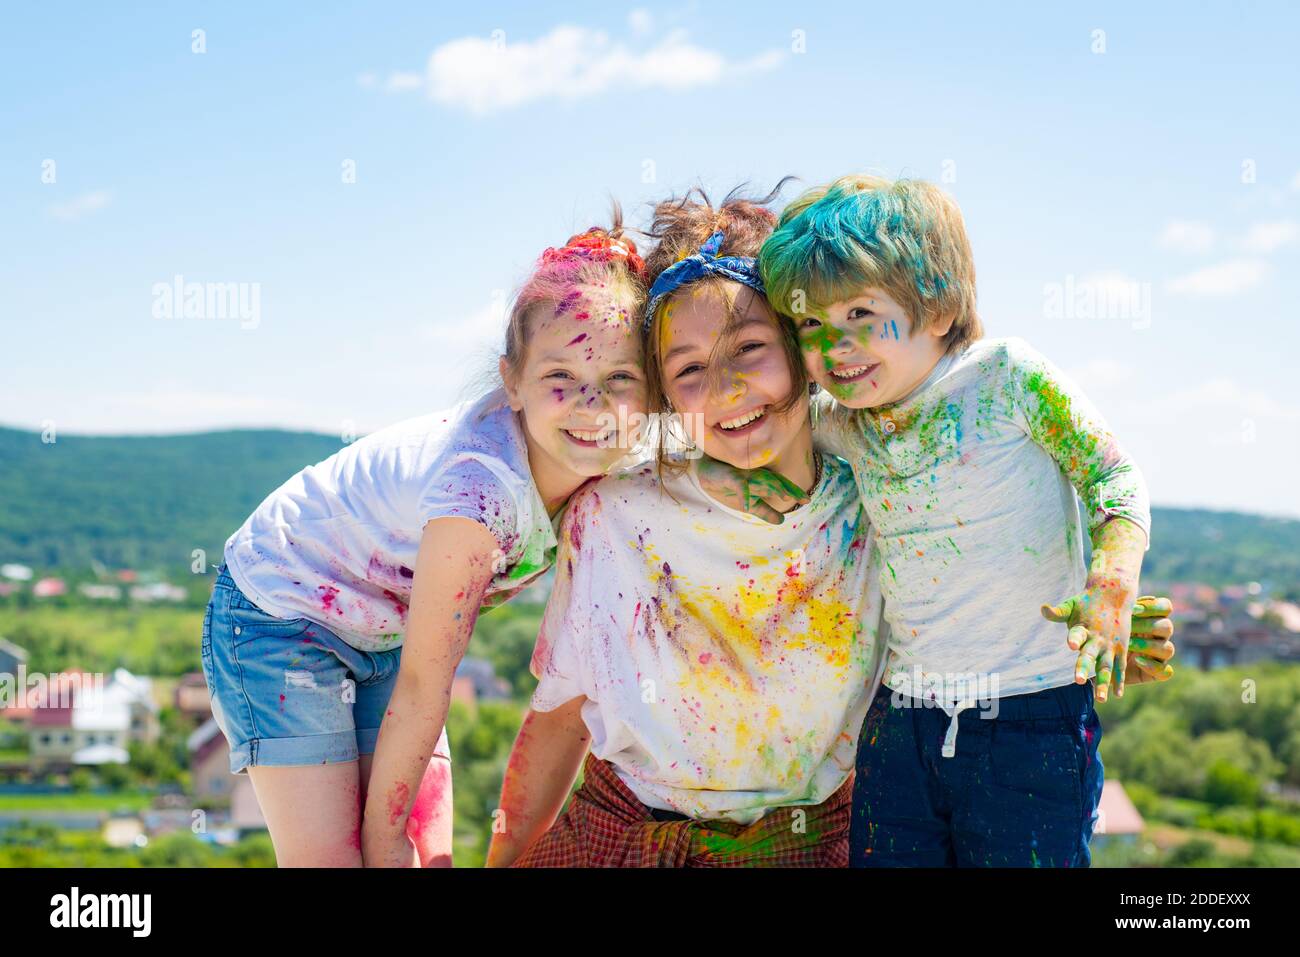 Kids painted in the colors of Holi festival. Stock Photo